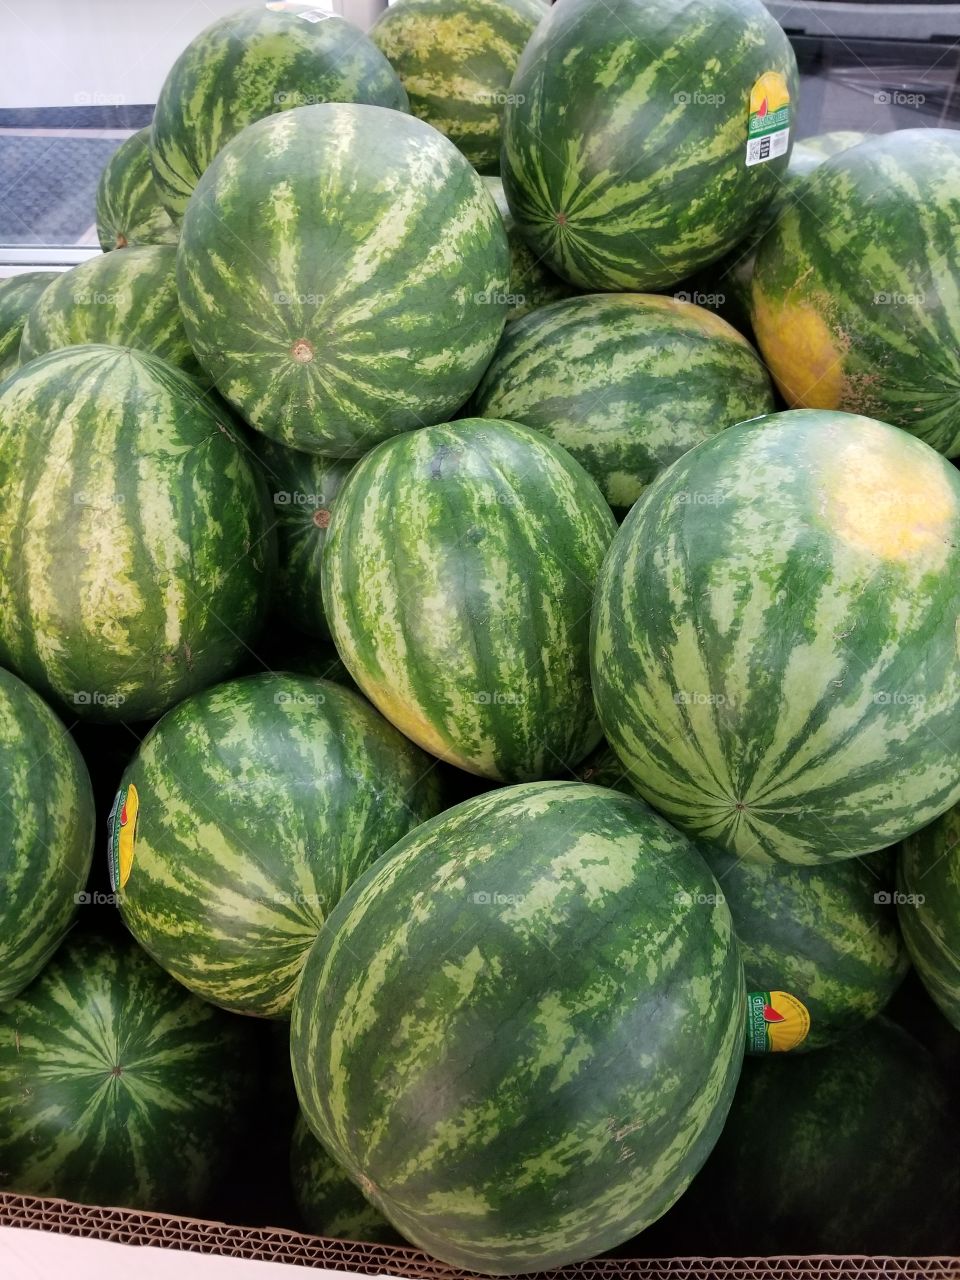 Watermelons  for the summer yummy